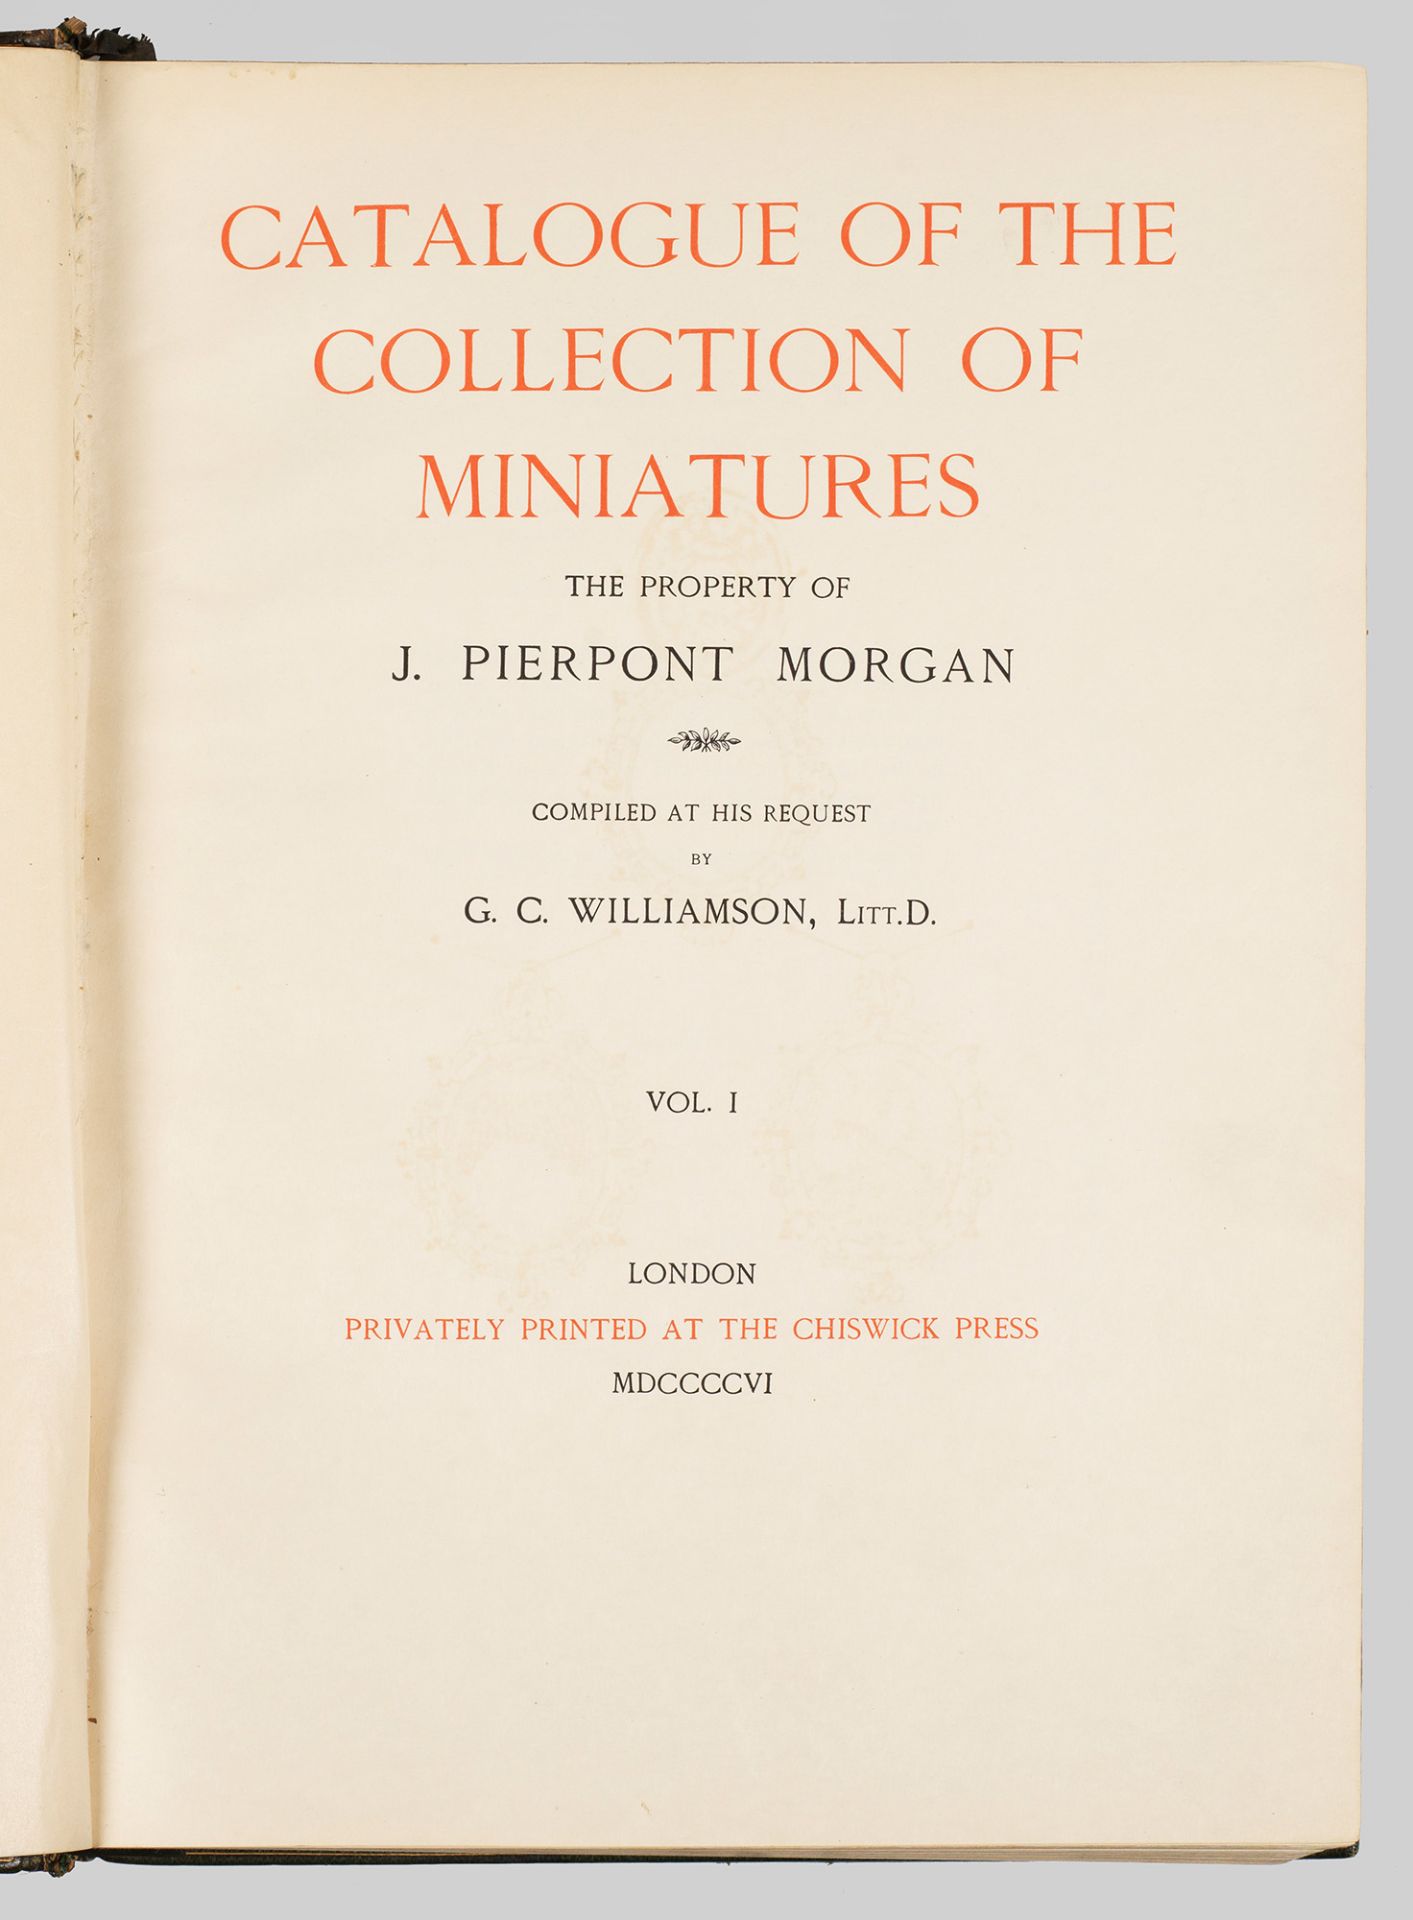 G. C. Williamson: "Catalogue of the Collection